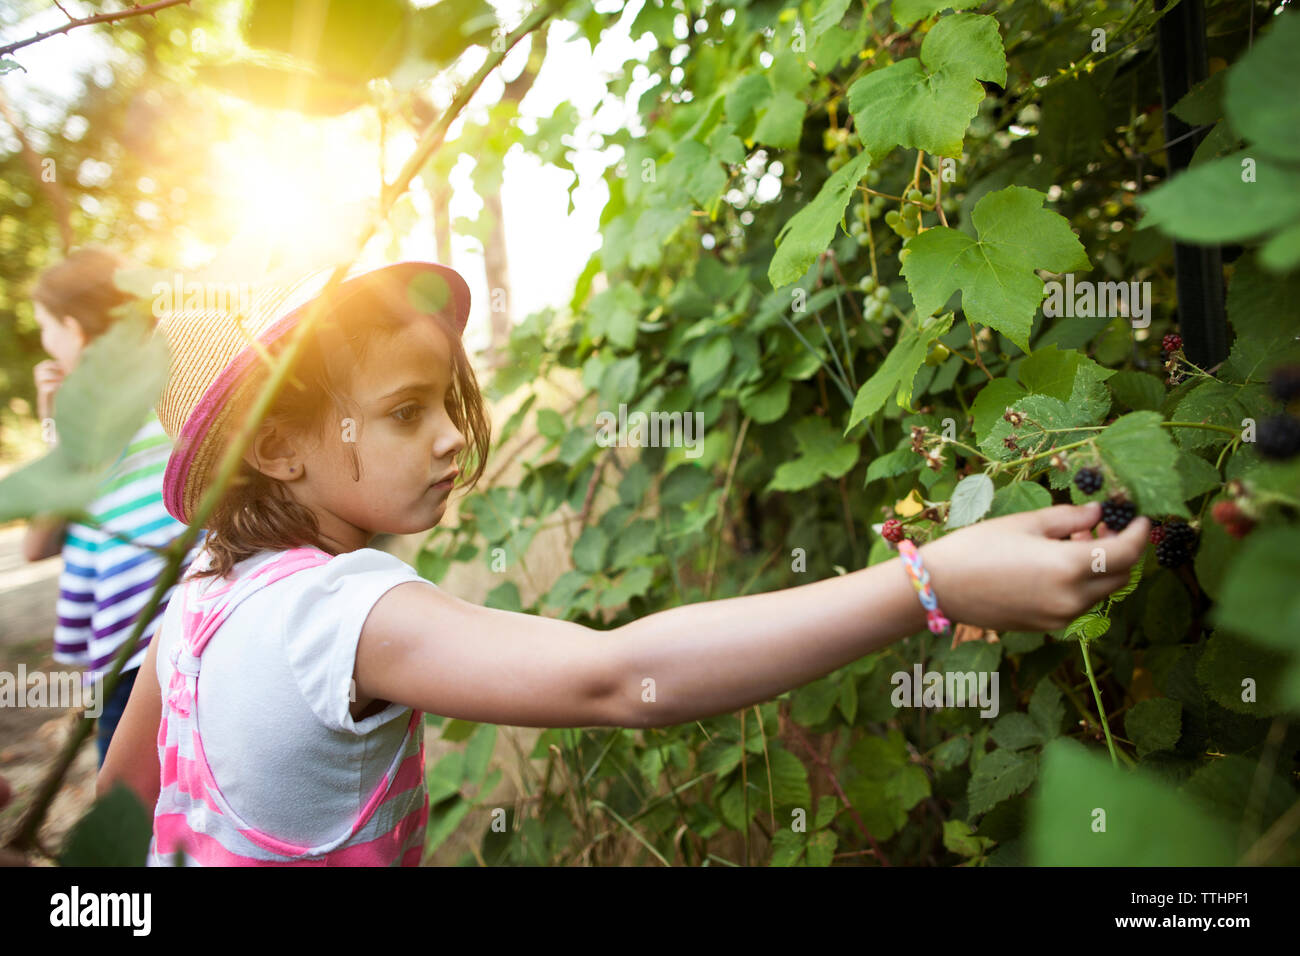 Girl plucking blackberries from tree at field Stock Photo